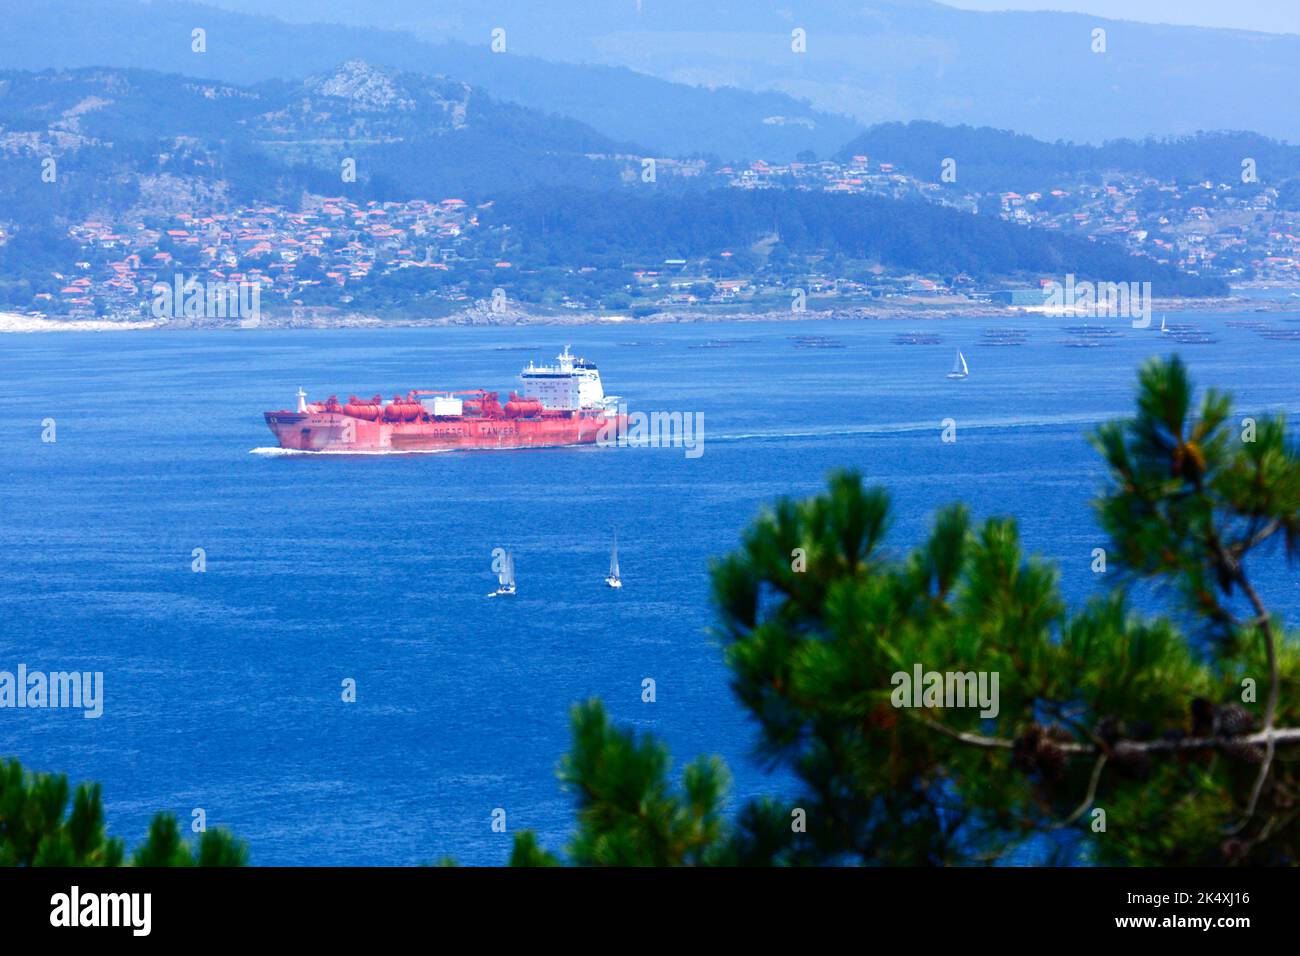 The Bow Summer (a chemical tanker owned by Norwegian company Odfjell Tankers) passing the Cies Islands as it leaves the Ria de Vigo, Galicia, Spain Stock Photo